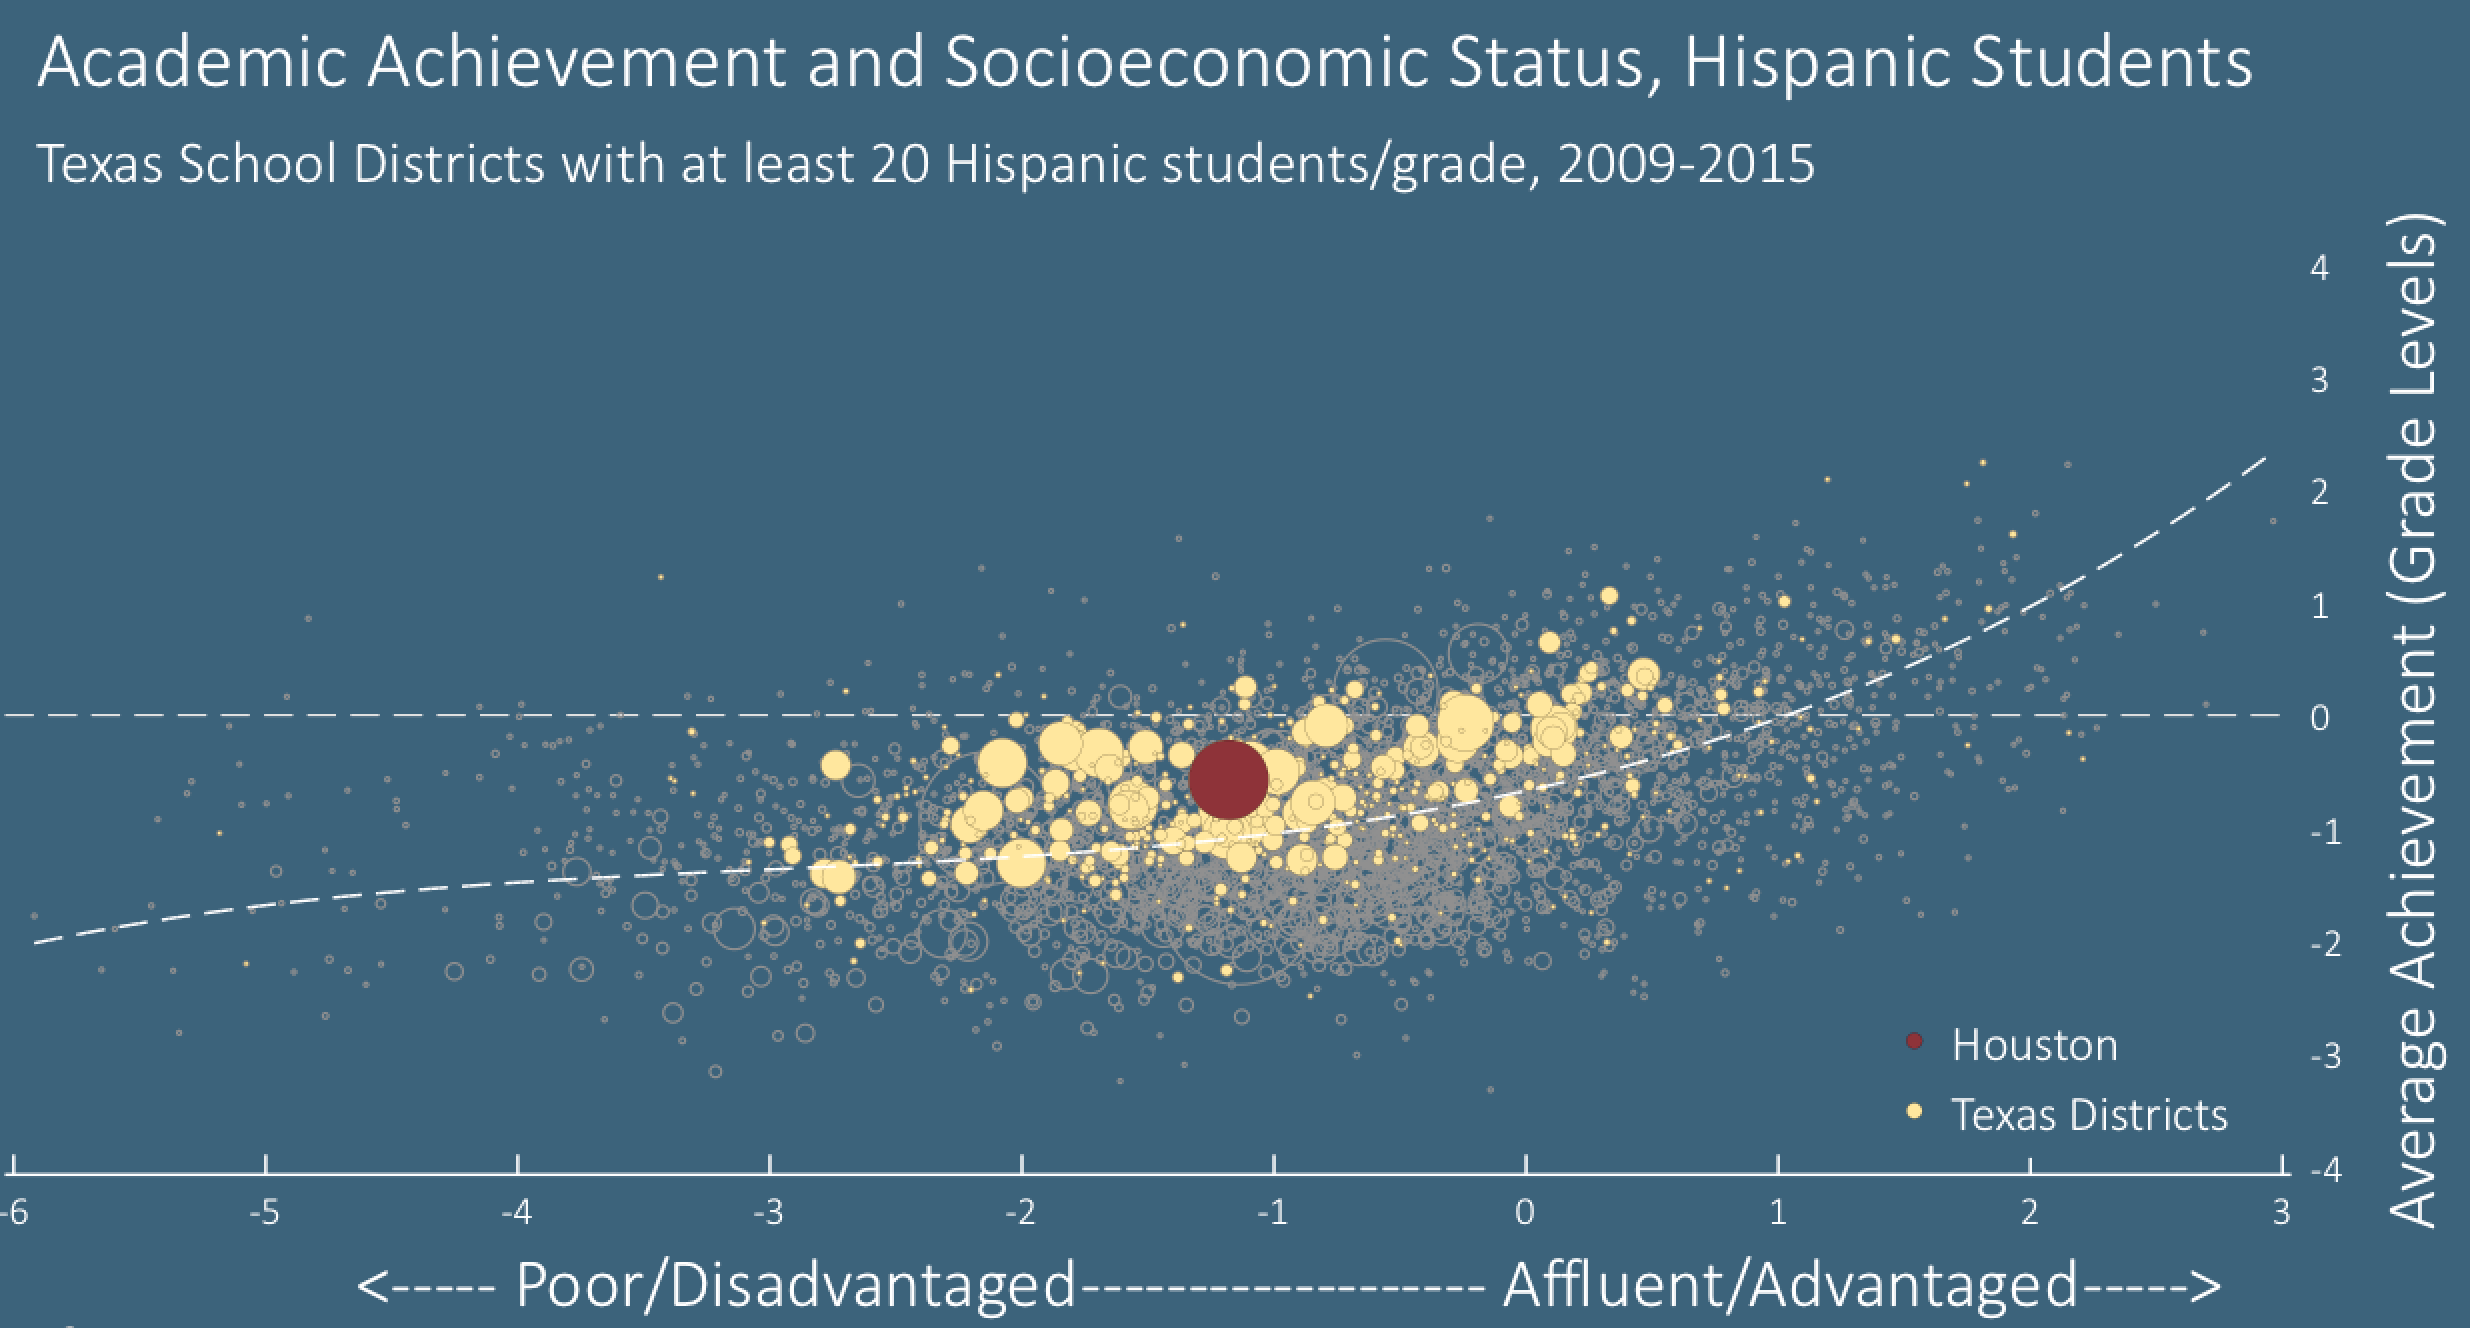 Hispanic student performance on standardized tests in each district plotted against socioeconomic status. Houston Independent School District shown in red. Source: Sean Reardon.